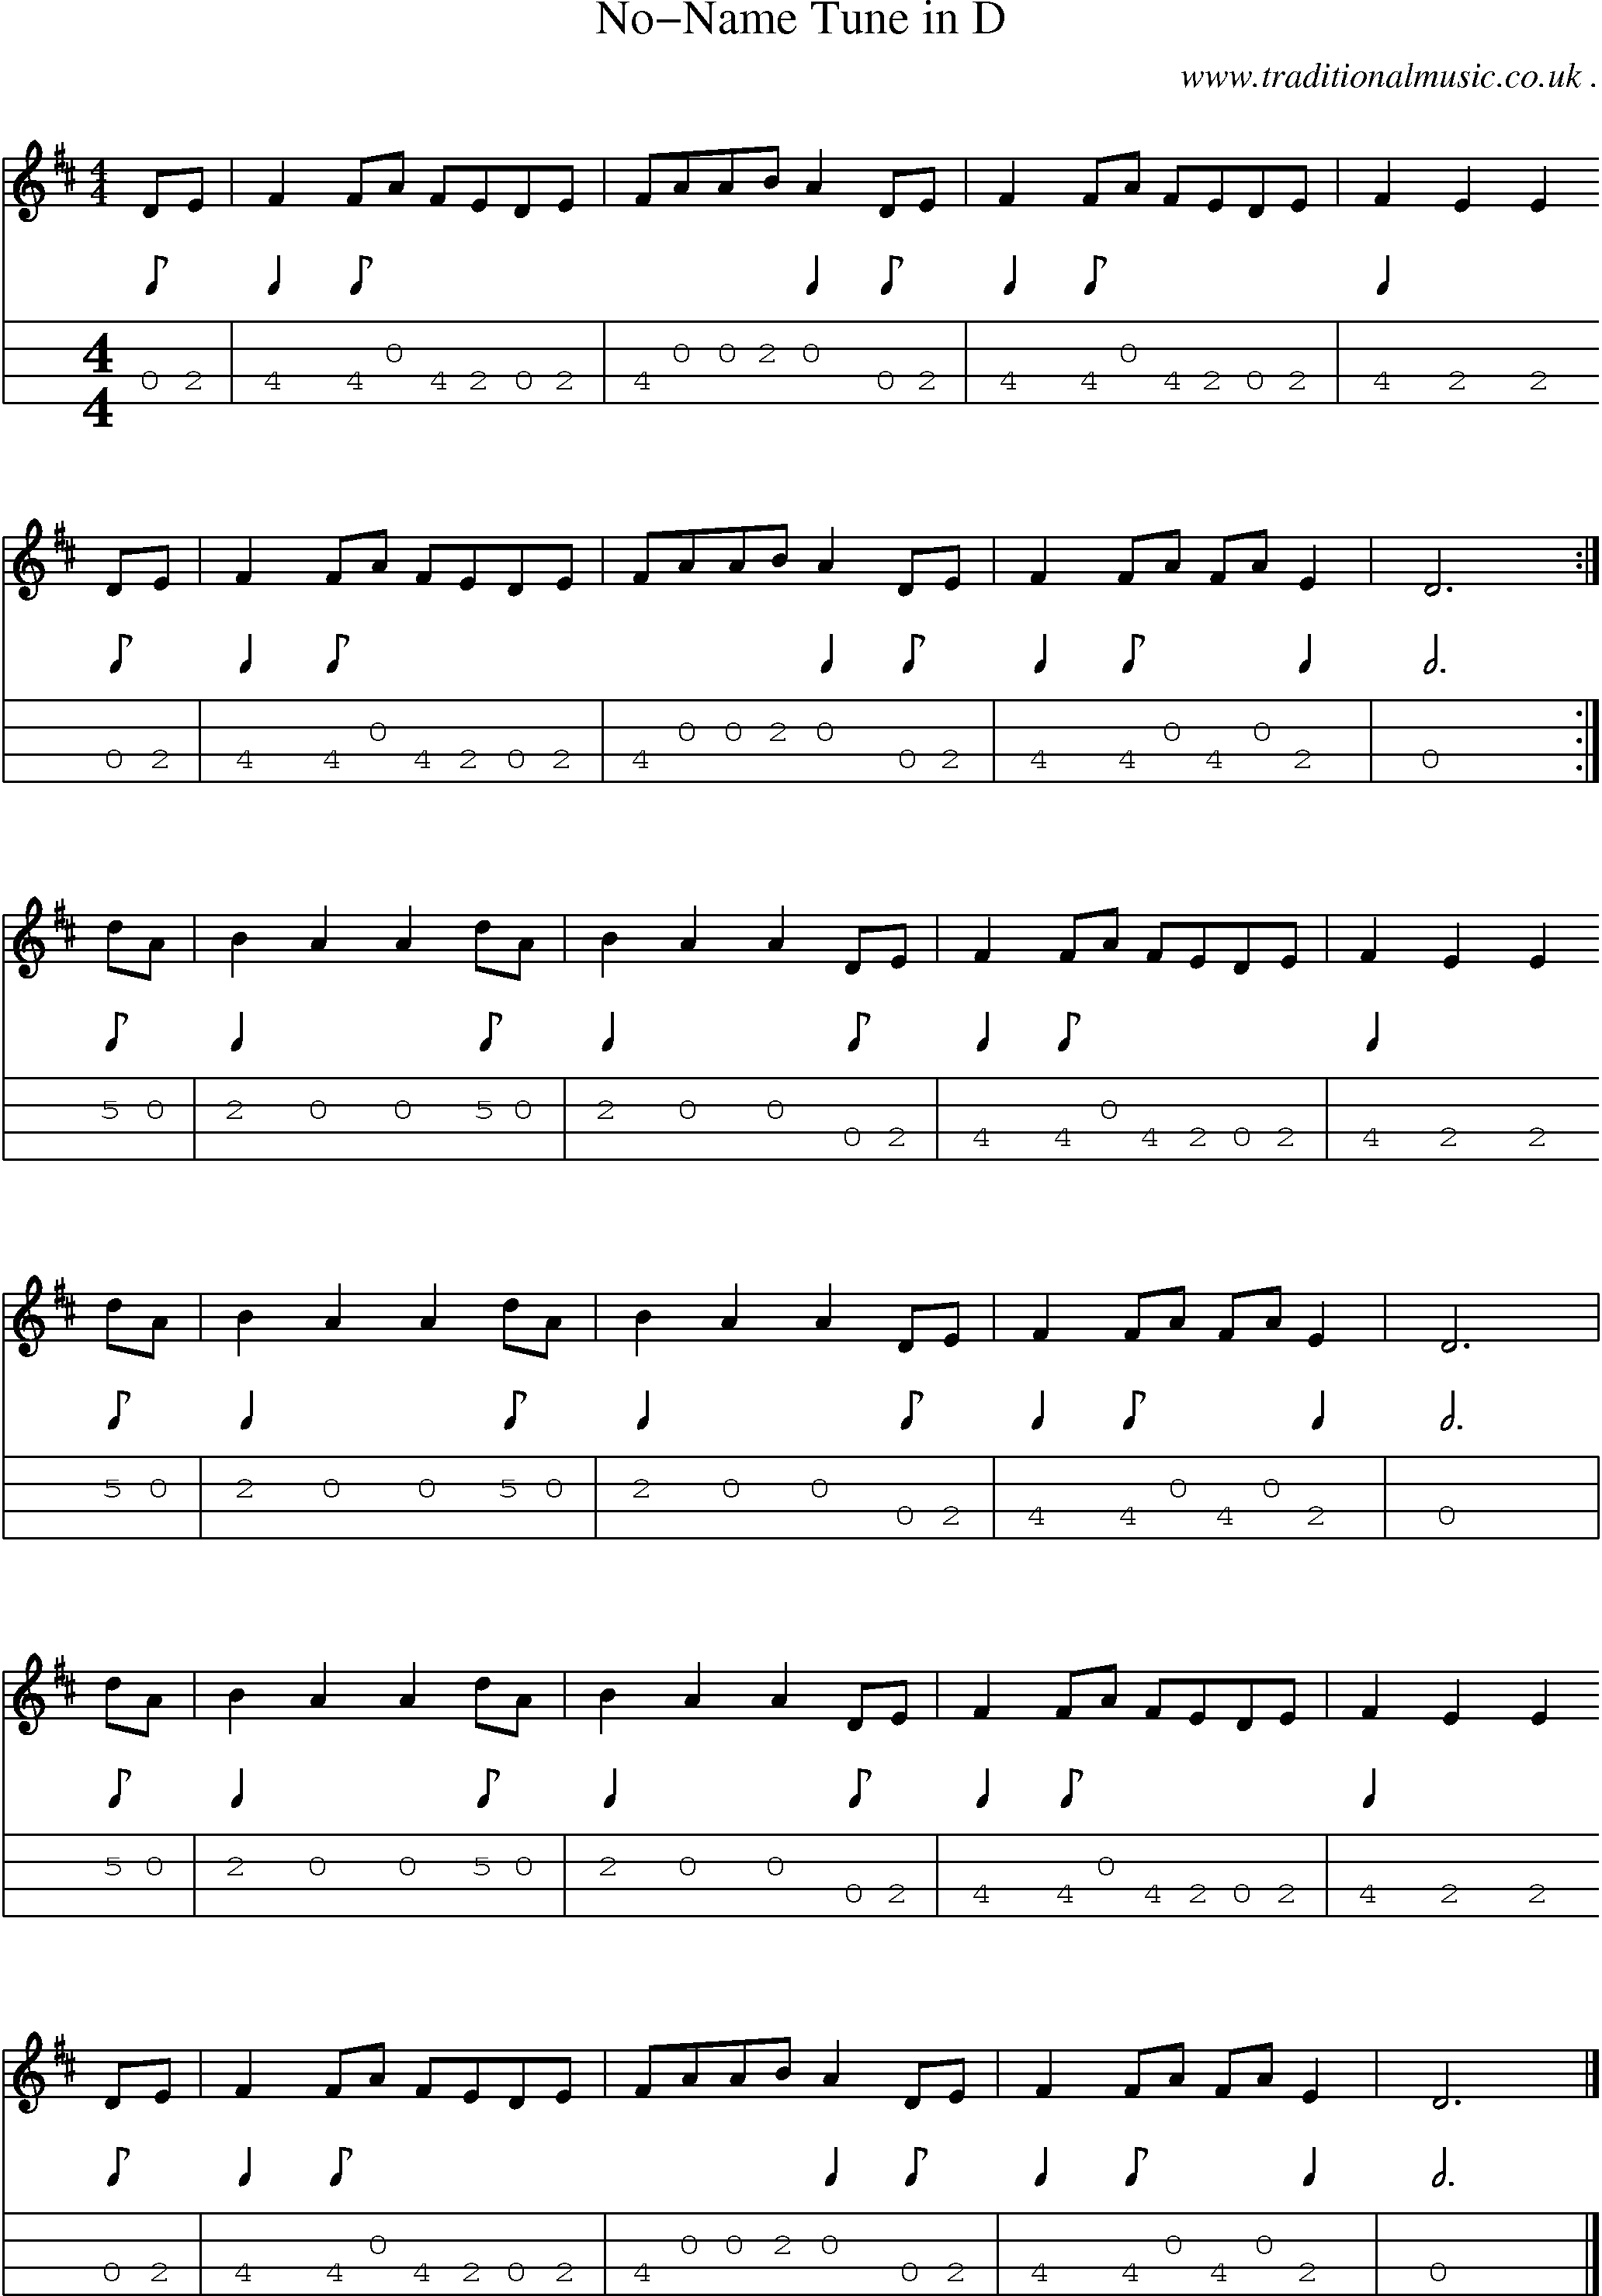 Sheet-music  score, Chords and Mandolin Tabs for No-name Tune In D